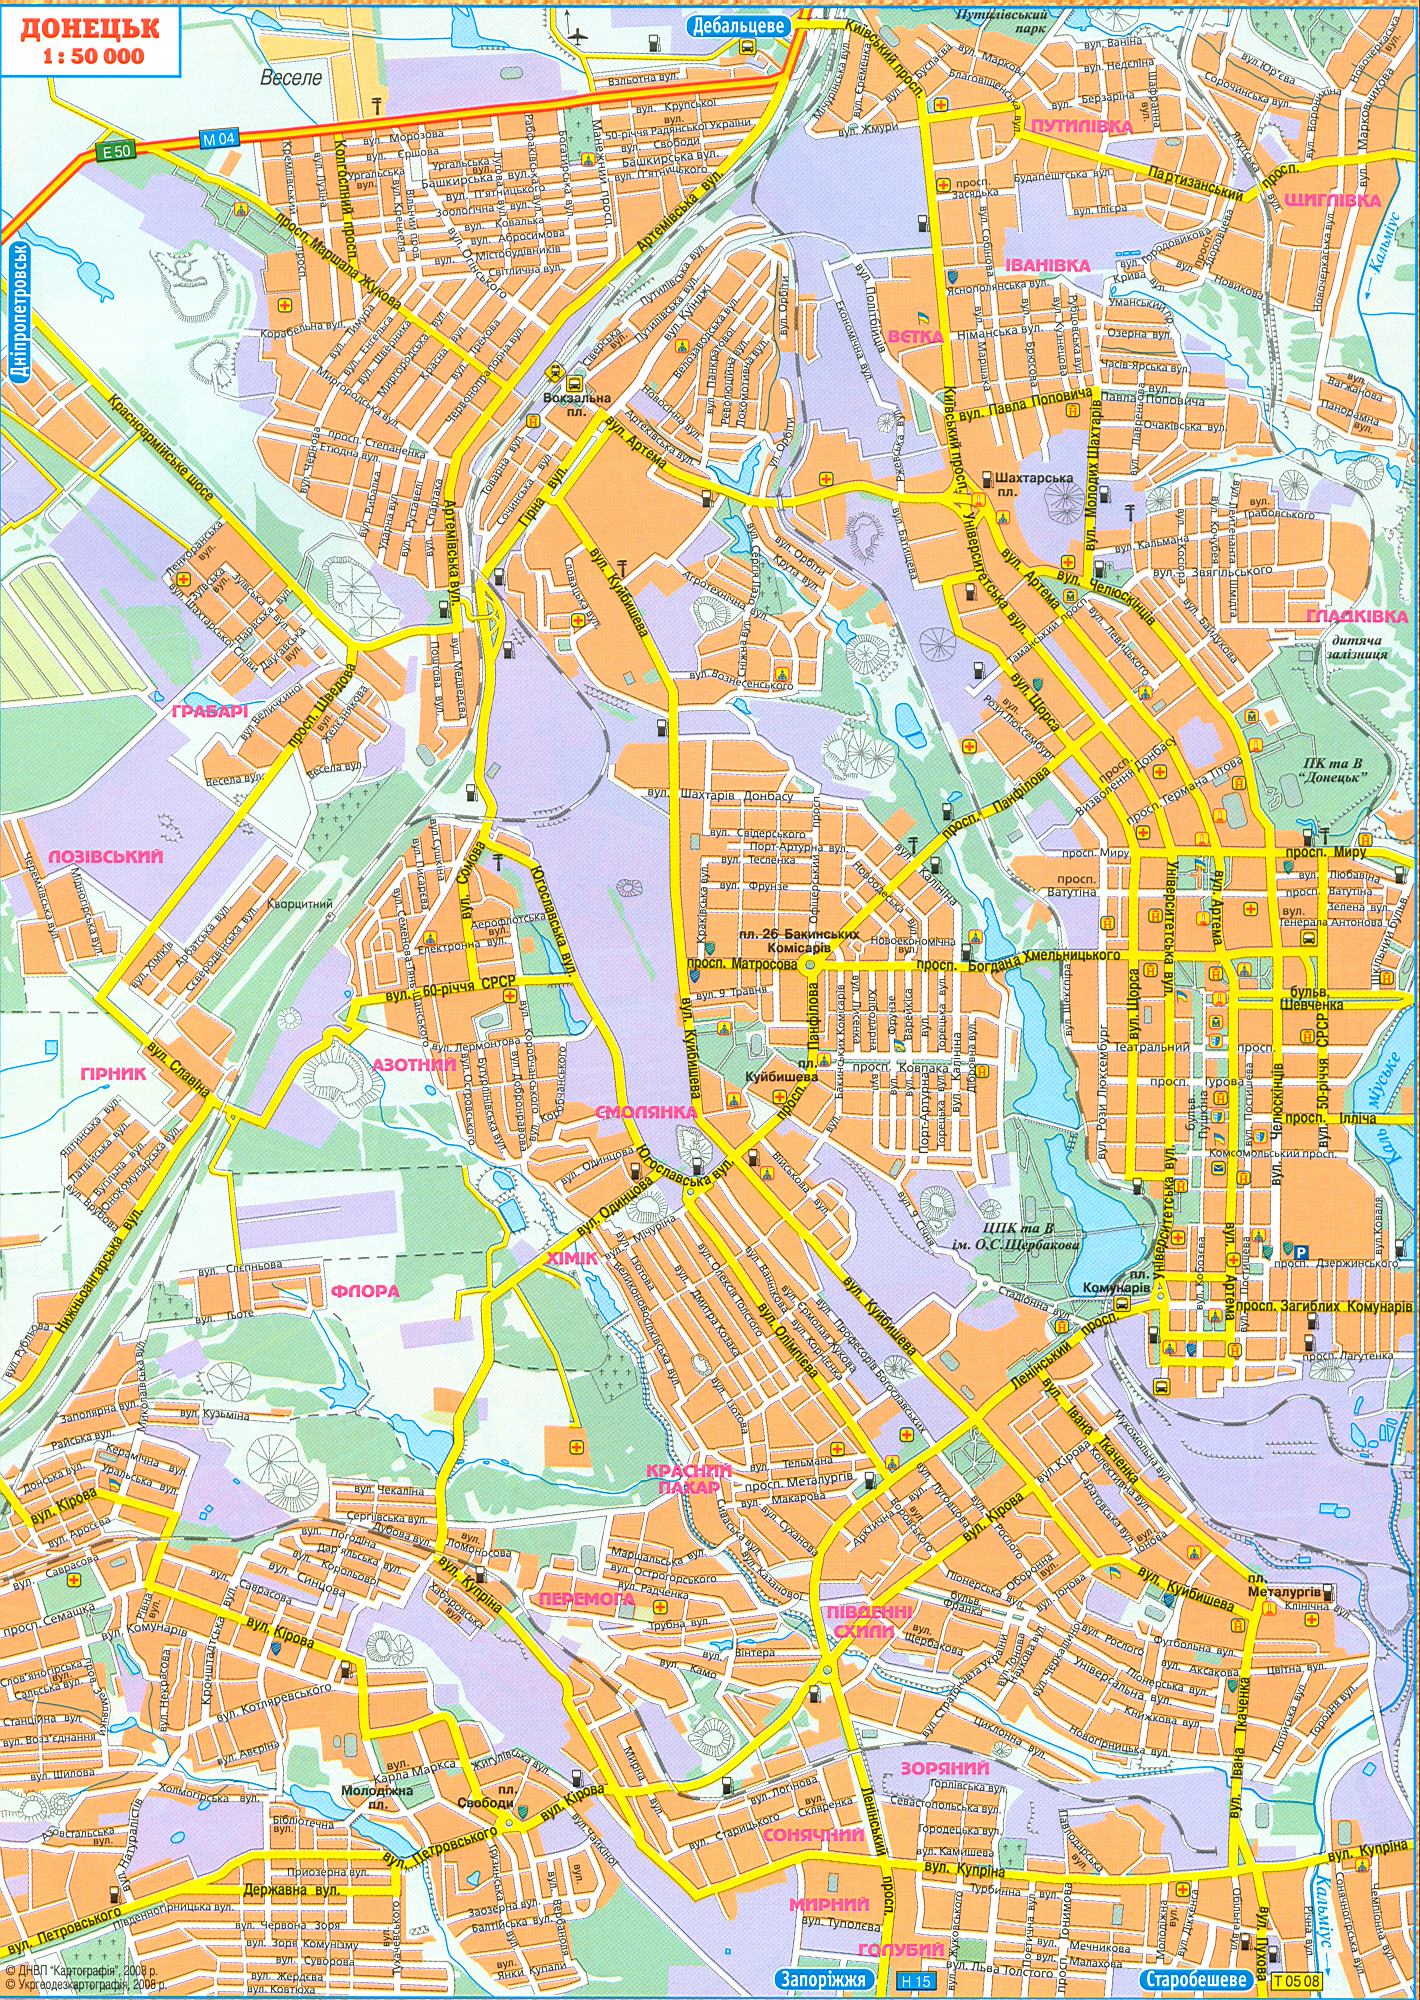 Map of Donetsk new 2008. Roads city of Donetsk - a map scale of 1cm: 500m. Download for free